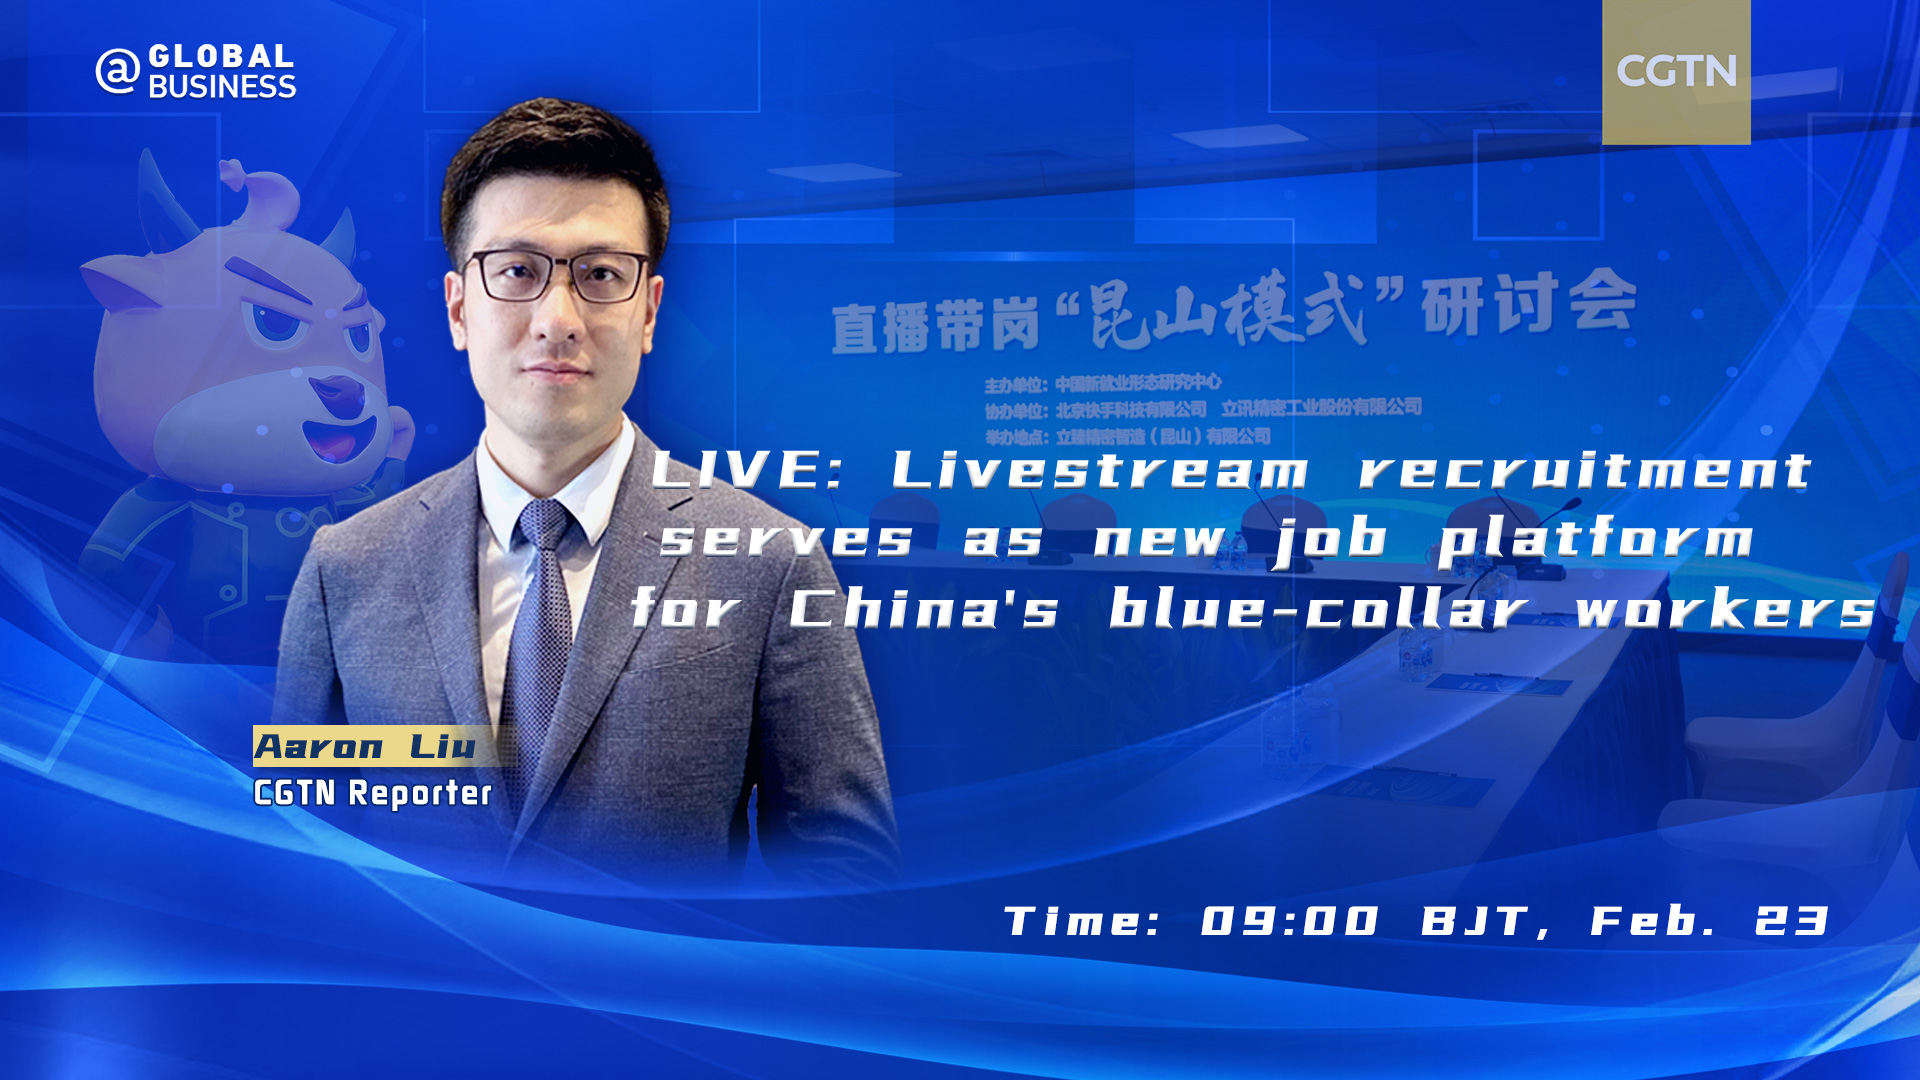 Live: Livestream recruitment serves as new job platform for China's blue-collar workers